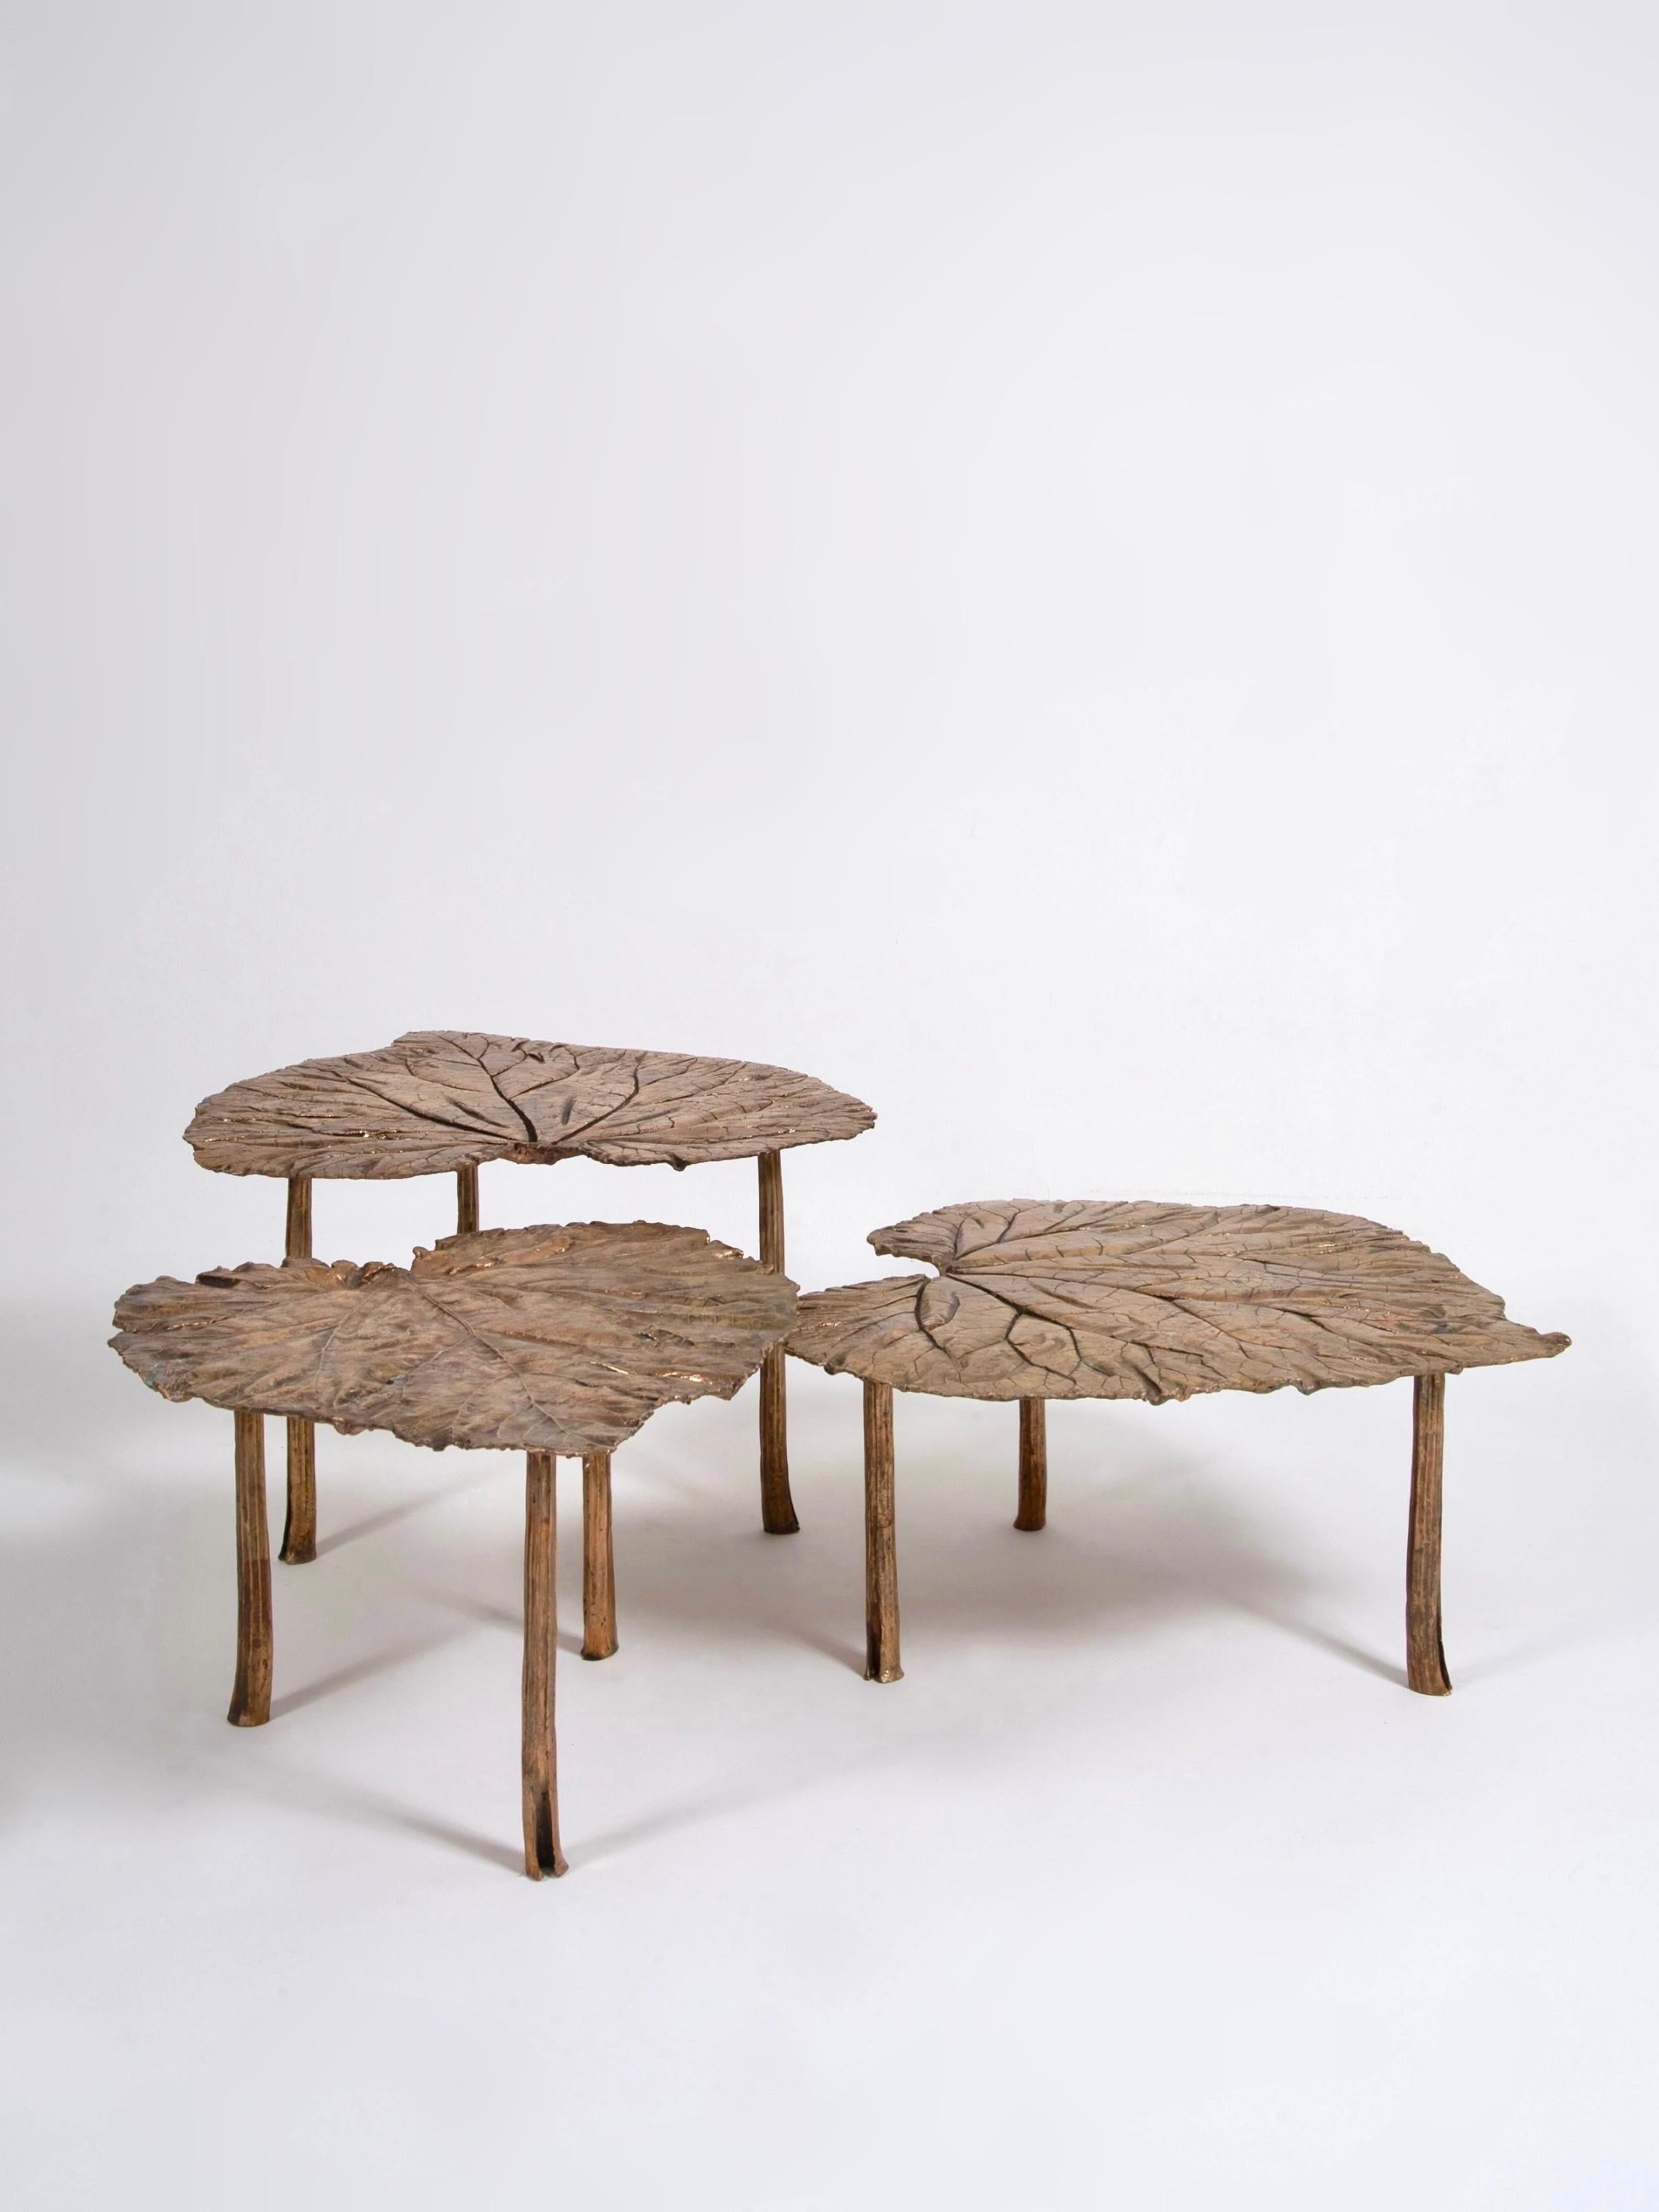 Gold patina bronze leaves coffee table by Clotilde Ancarani.
Different sizes : H 31/36/40 x 64/67/70 cm
Born in the United States, Clotilde Ancarani put into pratice her ease with painting and sculpture. The artist creates timeless objects